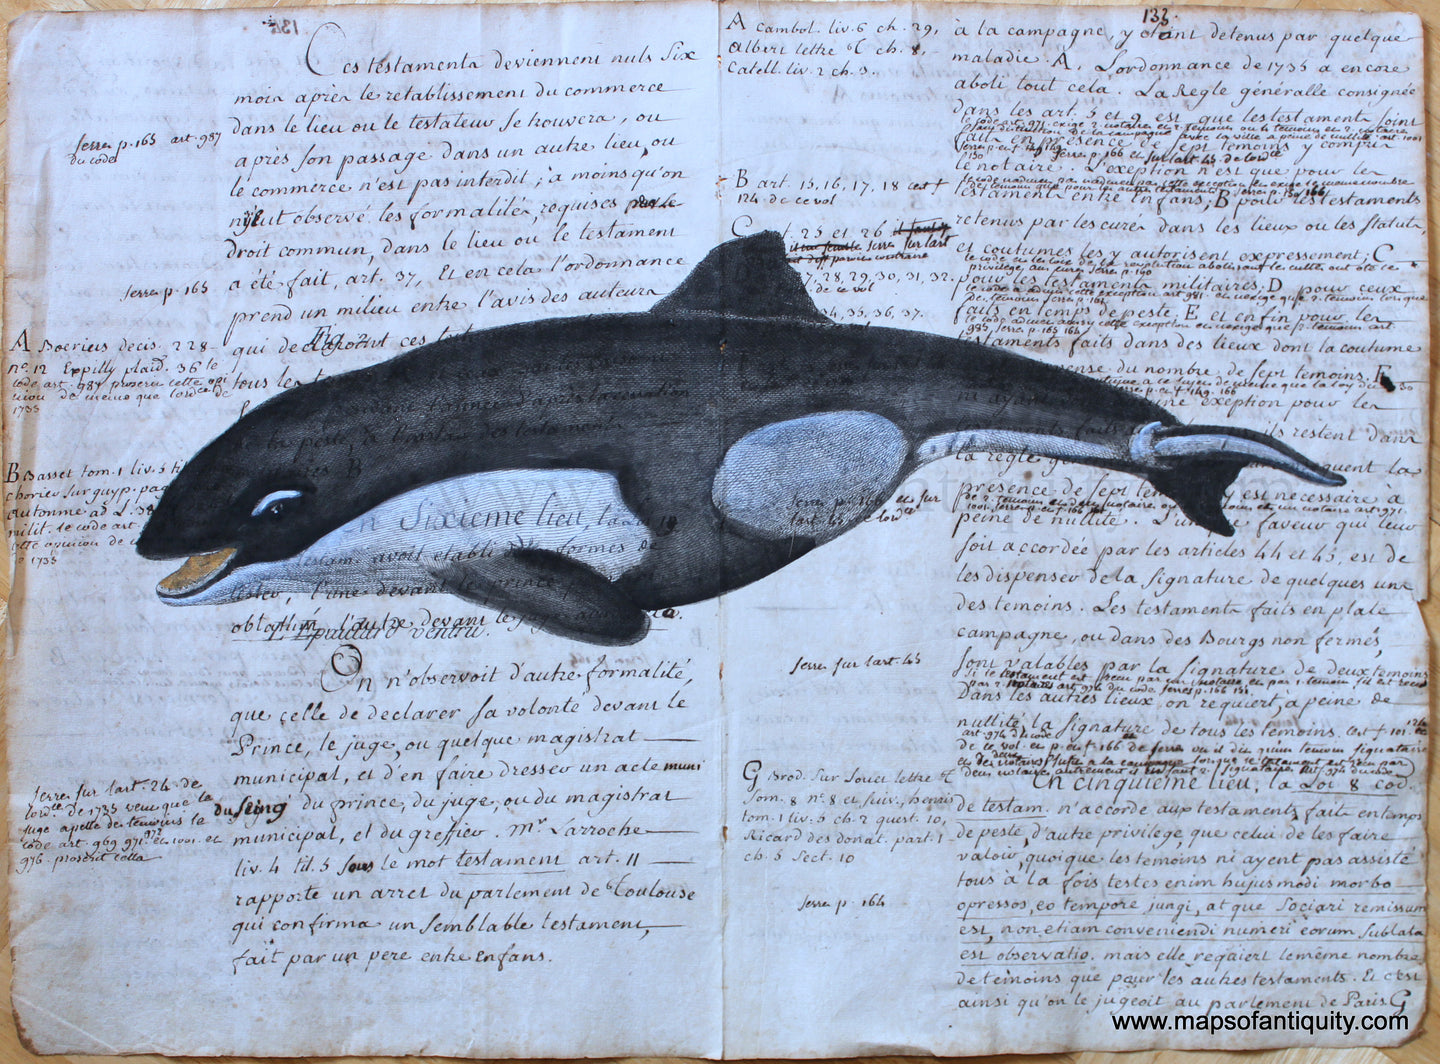 Digitally-Engraved-Specialty-Reproduction-Whale-(Reproduction)-Reproduction-Maps-of-Antiquity